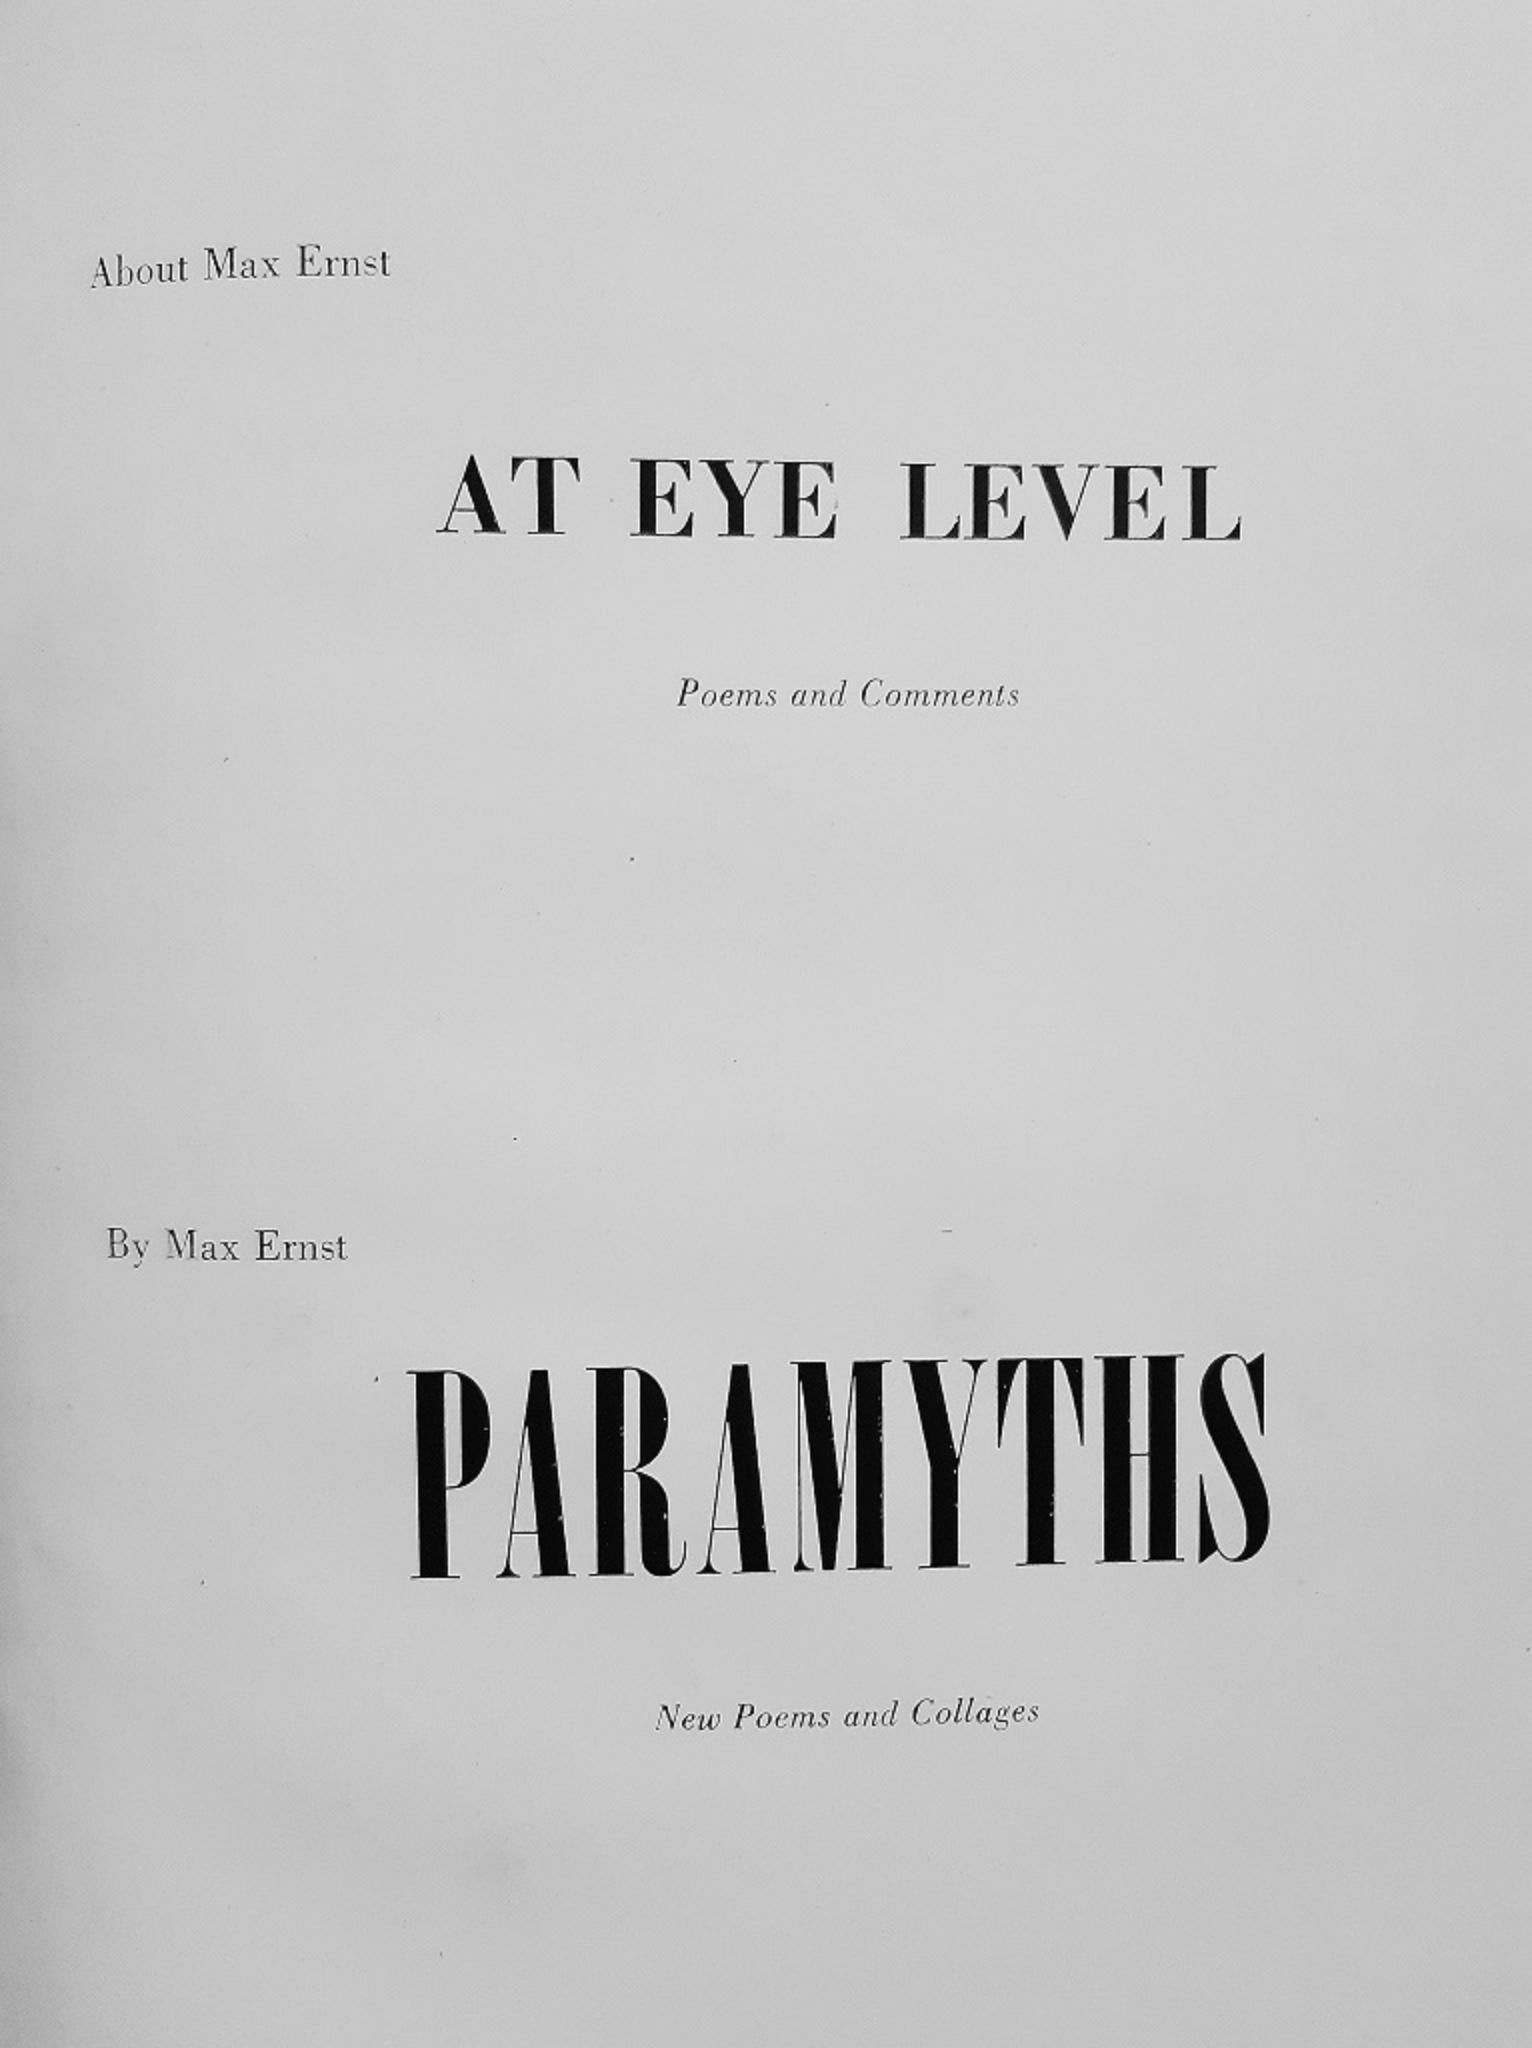 At Eye Level  Paramyths is an original modern rare book illustrated by Max Ernst (1891 - 1976) and written by Various Authors in 1949.

Original Edition, designed by Max Ernst as catalogue for the Copley Galleries with texts by Tanning, Calas,